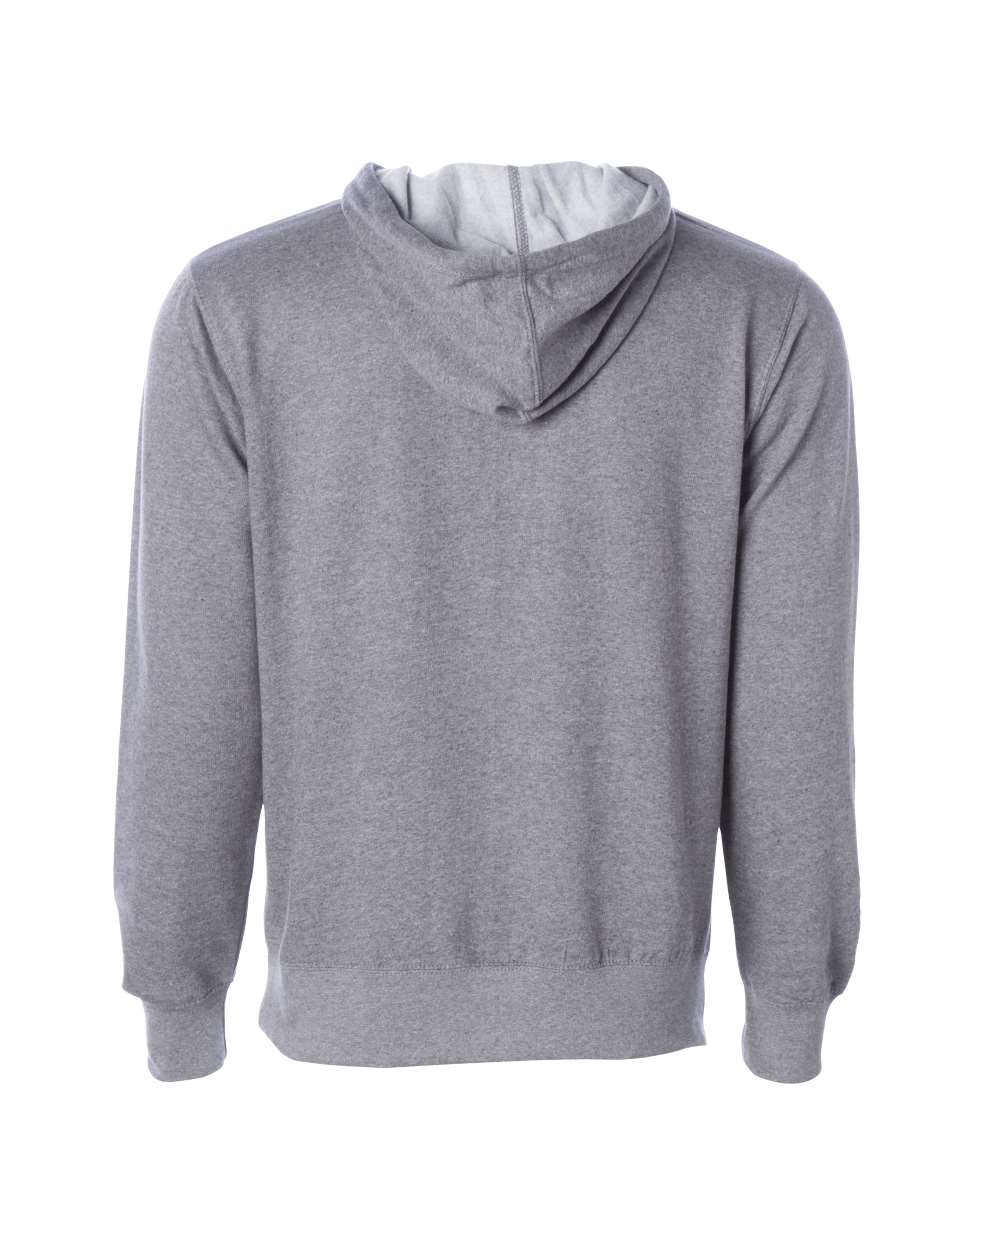 Independent Trading Co. Midweight Hooded Sweatshirt SS4500 #color_Gunmetal Heather